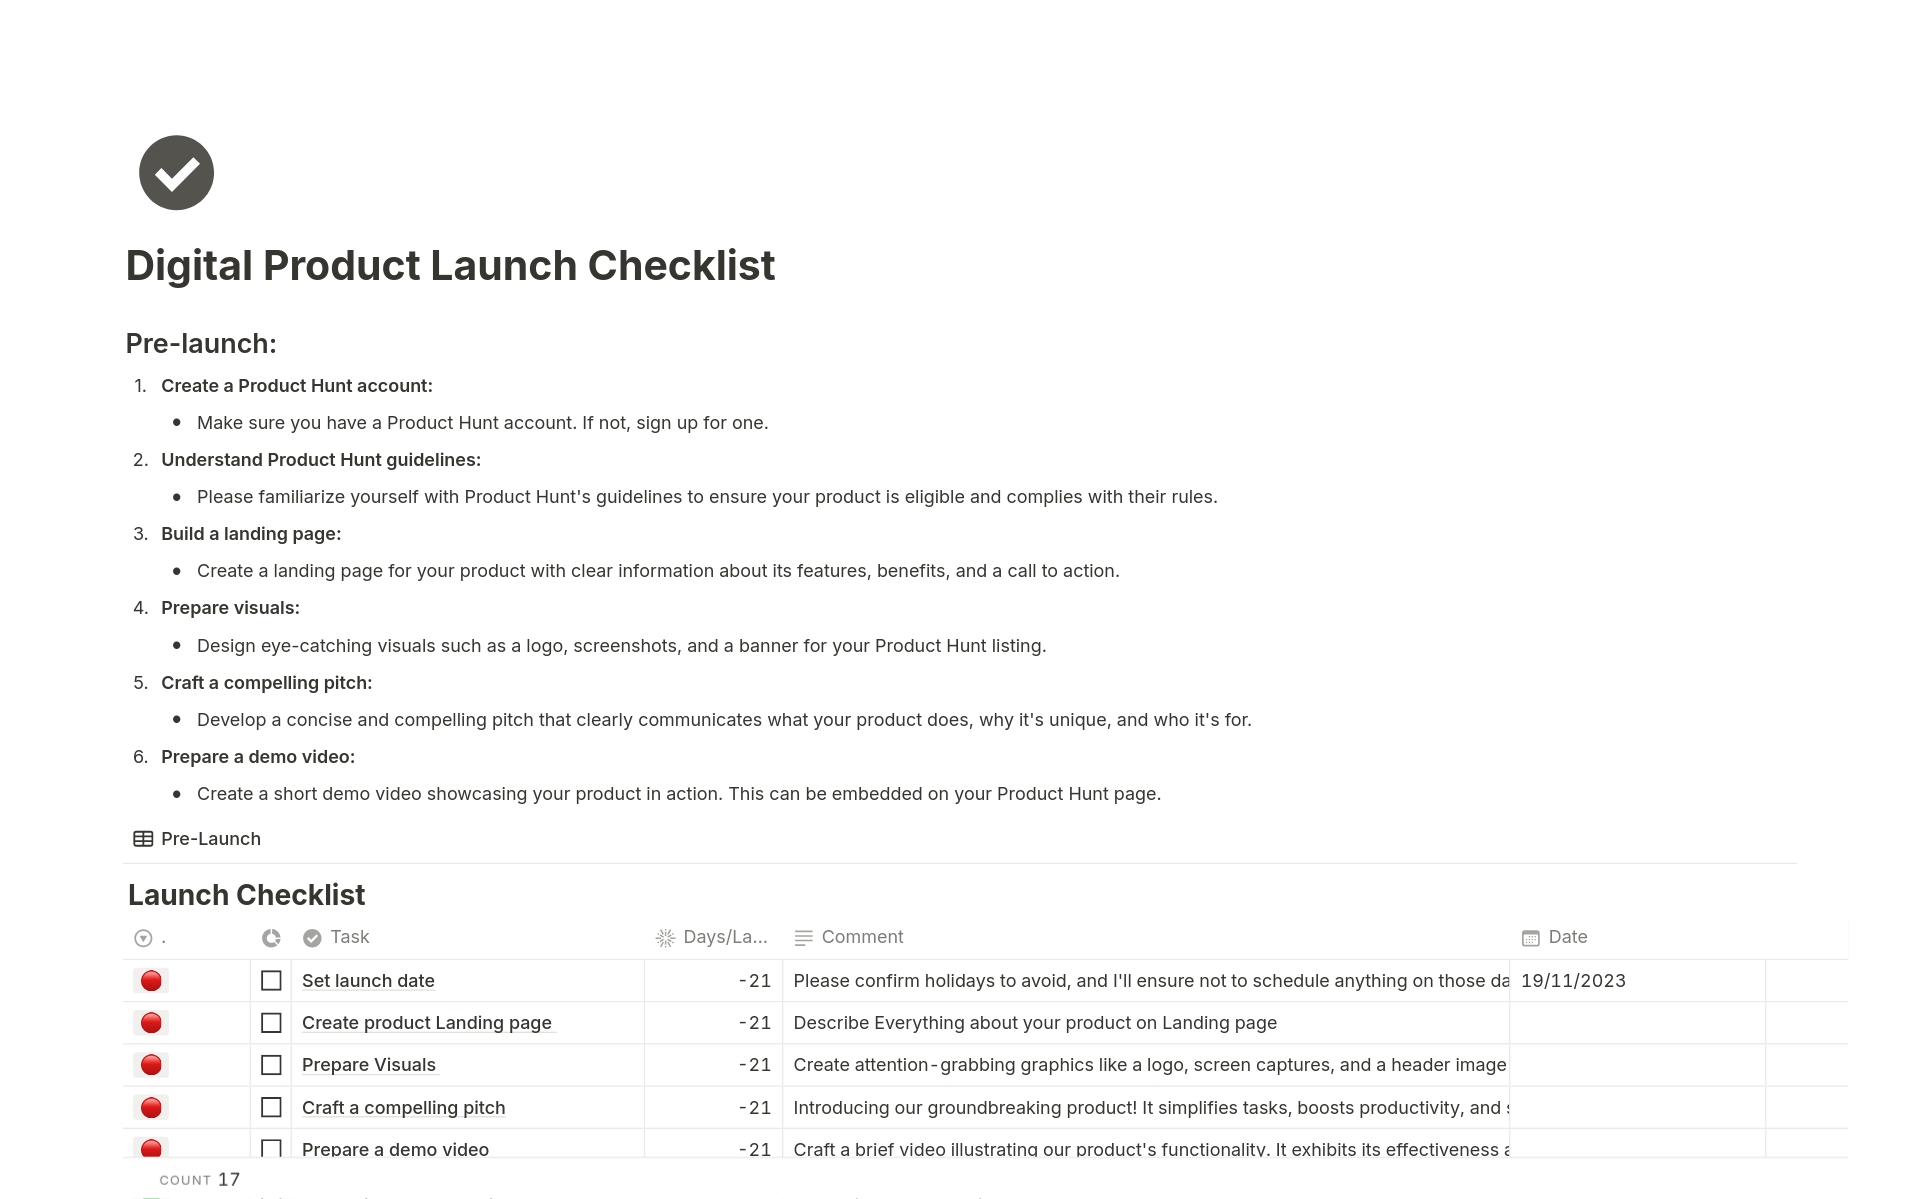 Digital Product Launch Checklist
a.Pre-Launch
b.Day of Launch
c.Post Launch